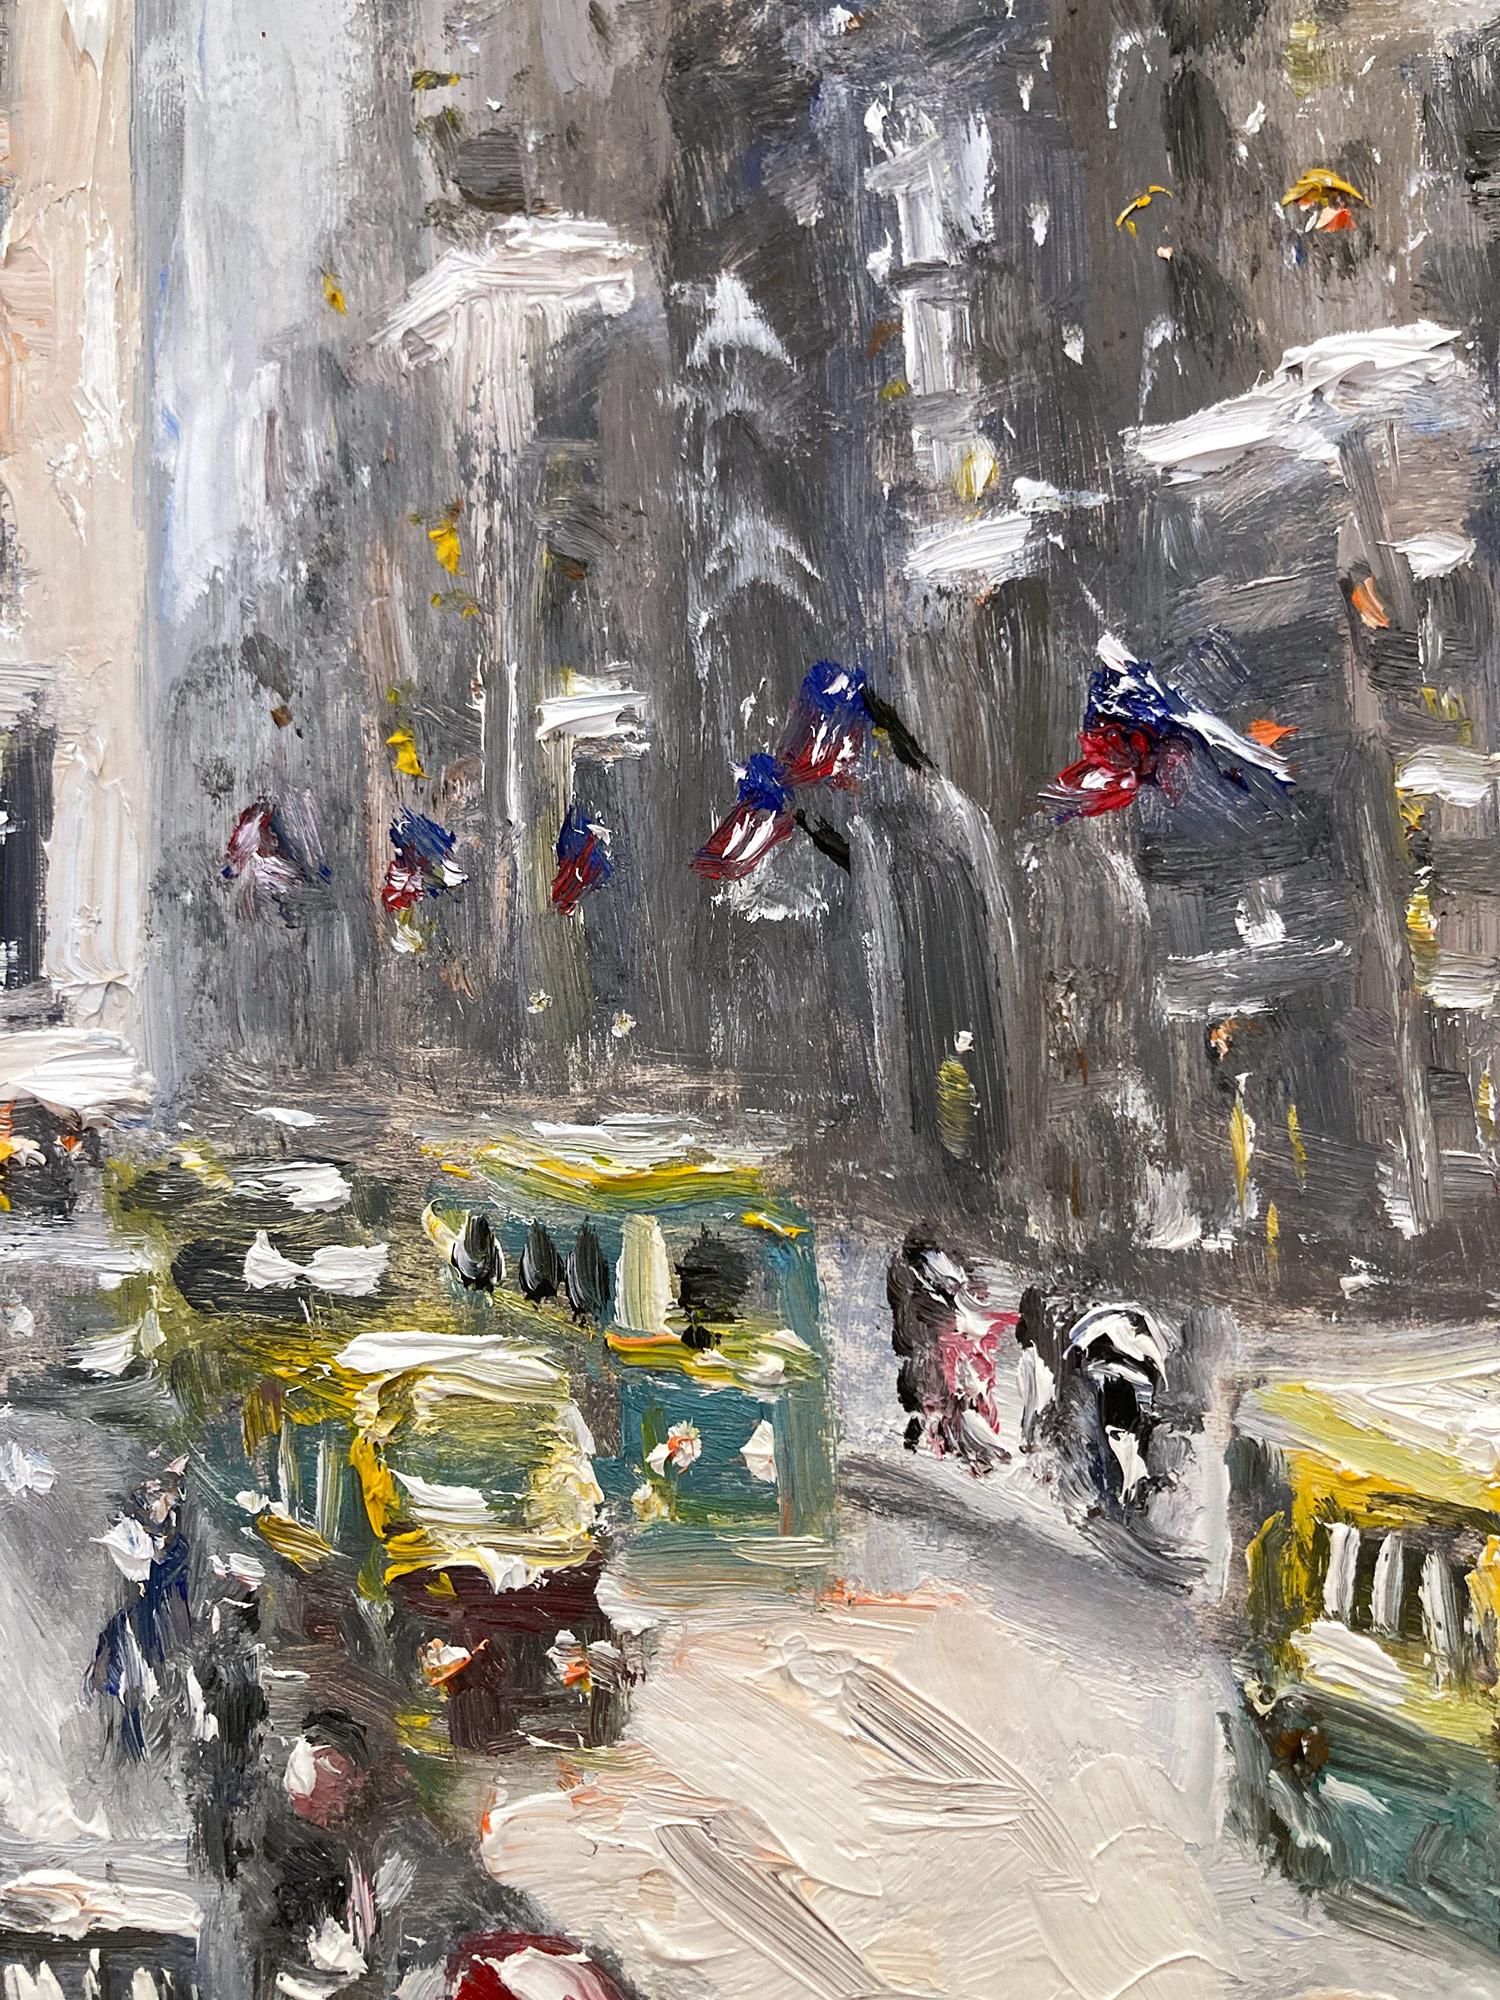 A charming depiction of the 42nd Street Library in the snow with figures and cars. A cozy impressionistic scene with warmth and feeling. A whimsical scene with stunning details and beautiful brushwork. Inspired by Guy Wiggins, this piece captures